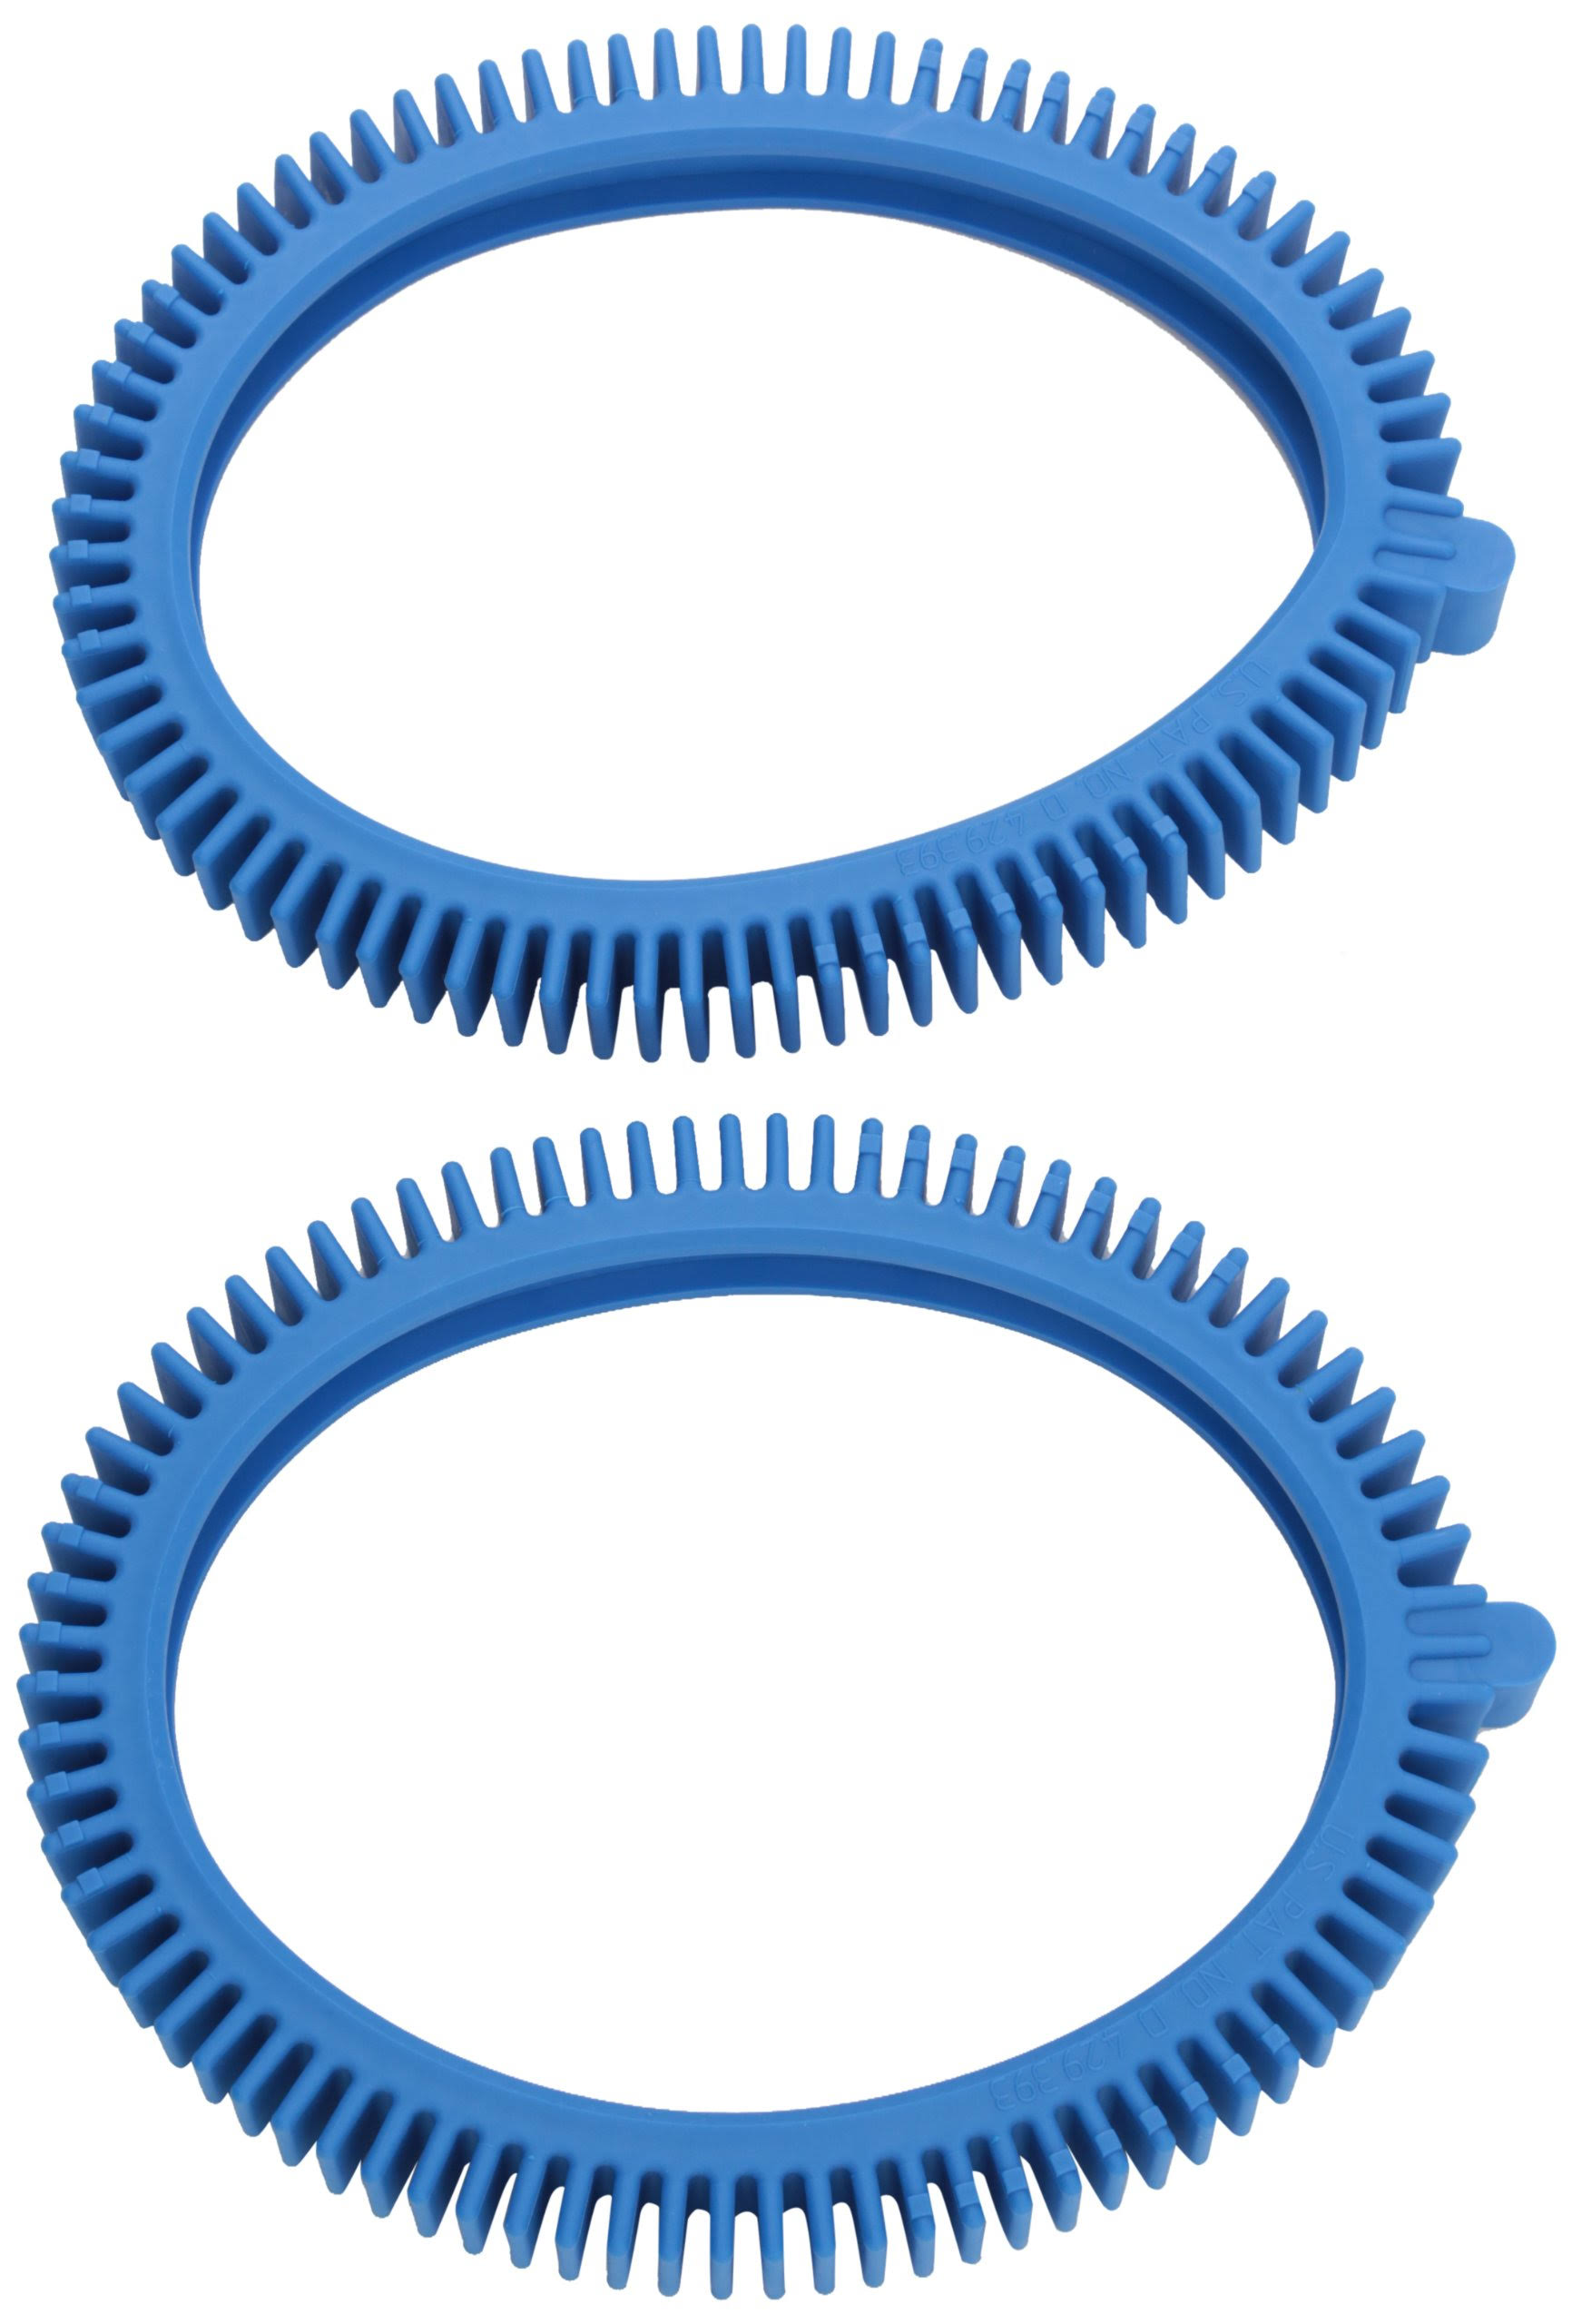 Poolvergnuegen 896584000-143 Front Tire Kit - with Super Hump Replacement for Select Pool Cleaners, 2pk, Blue